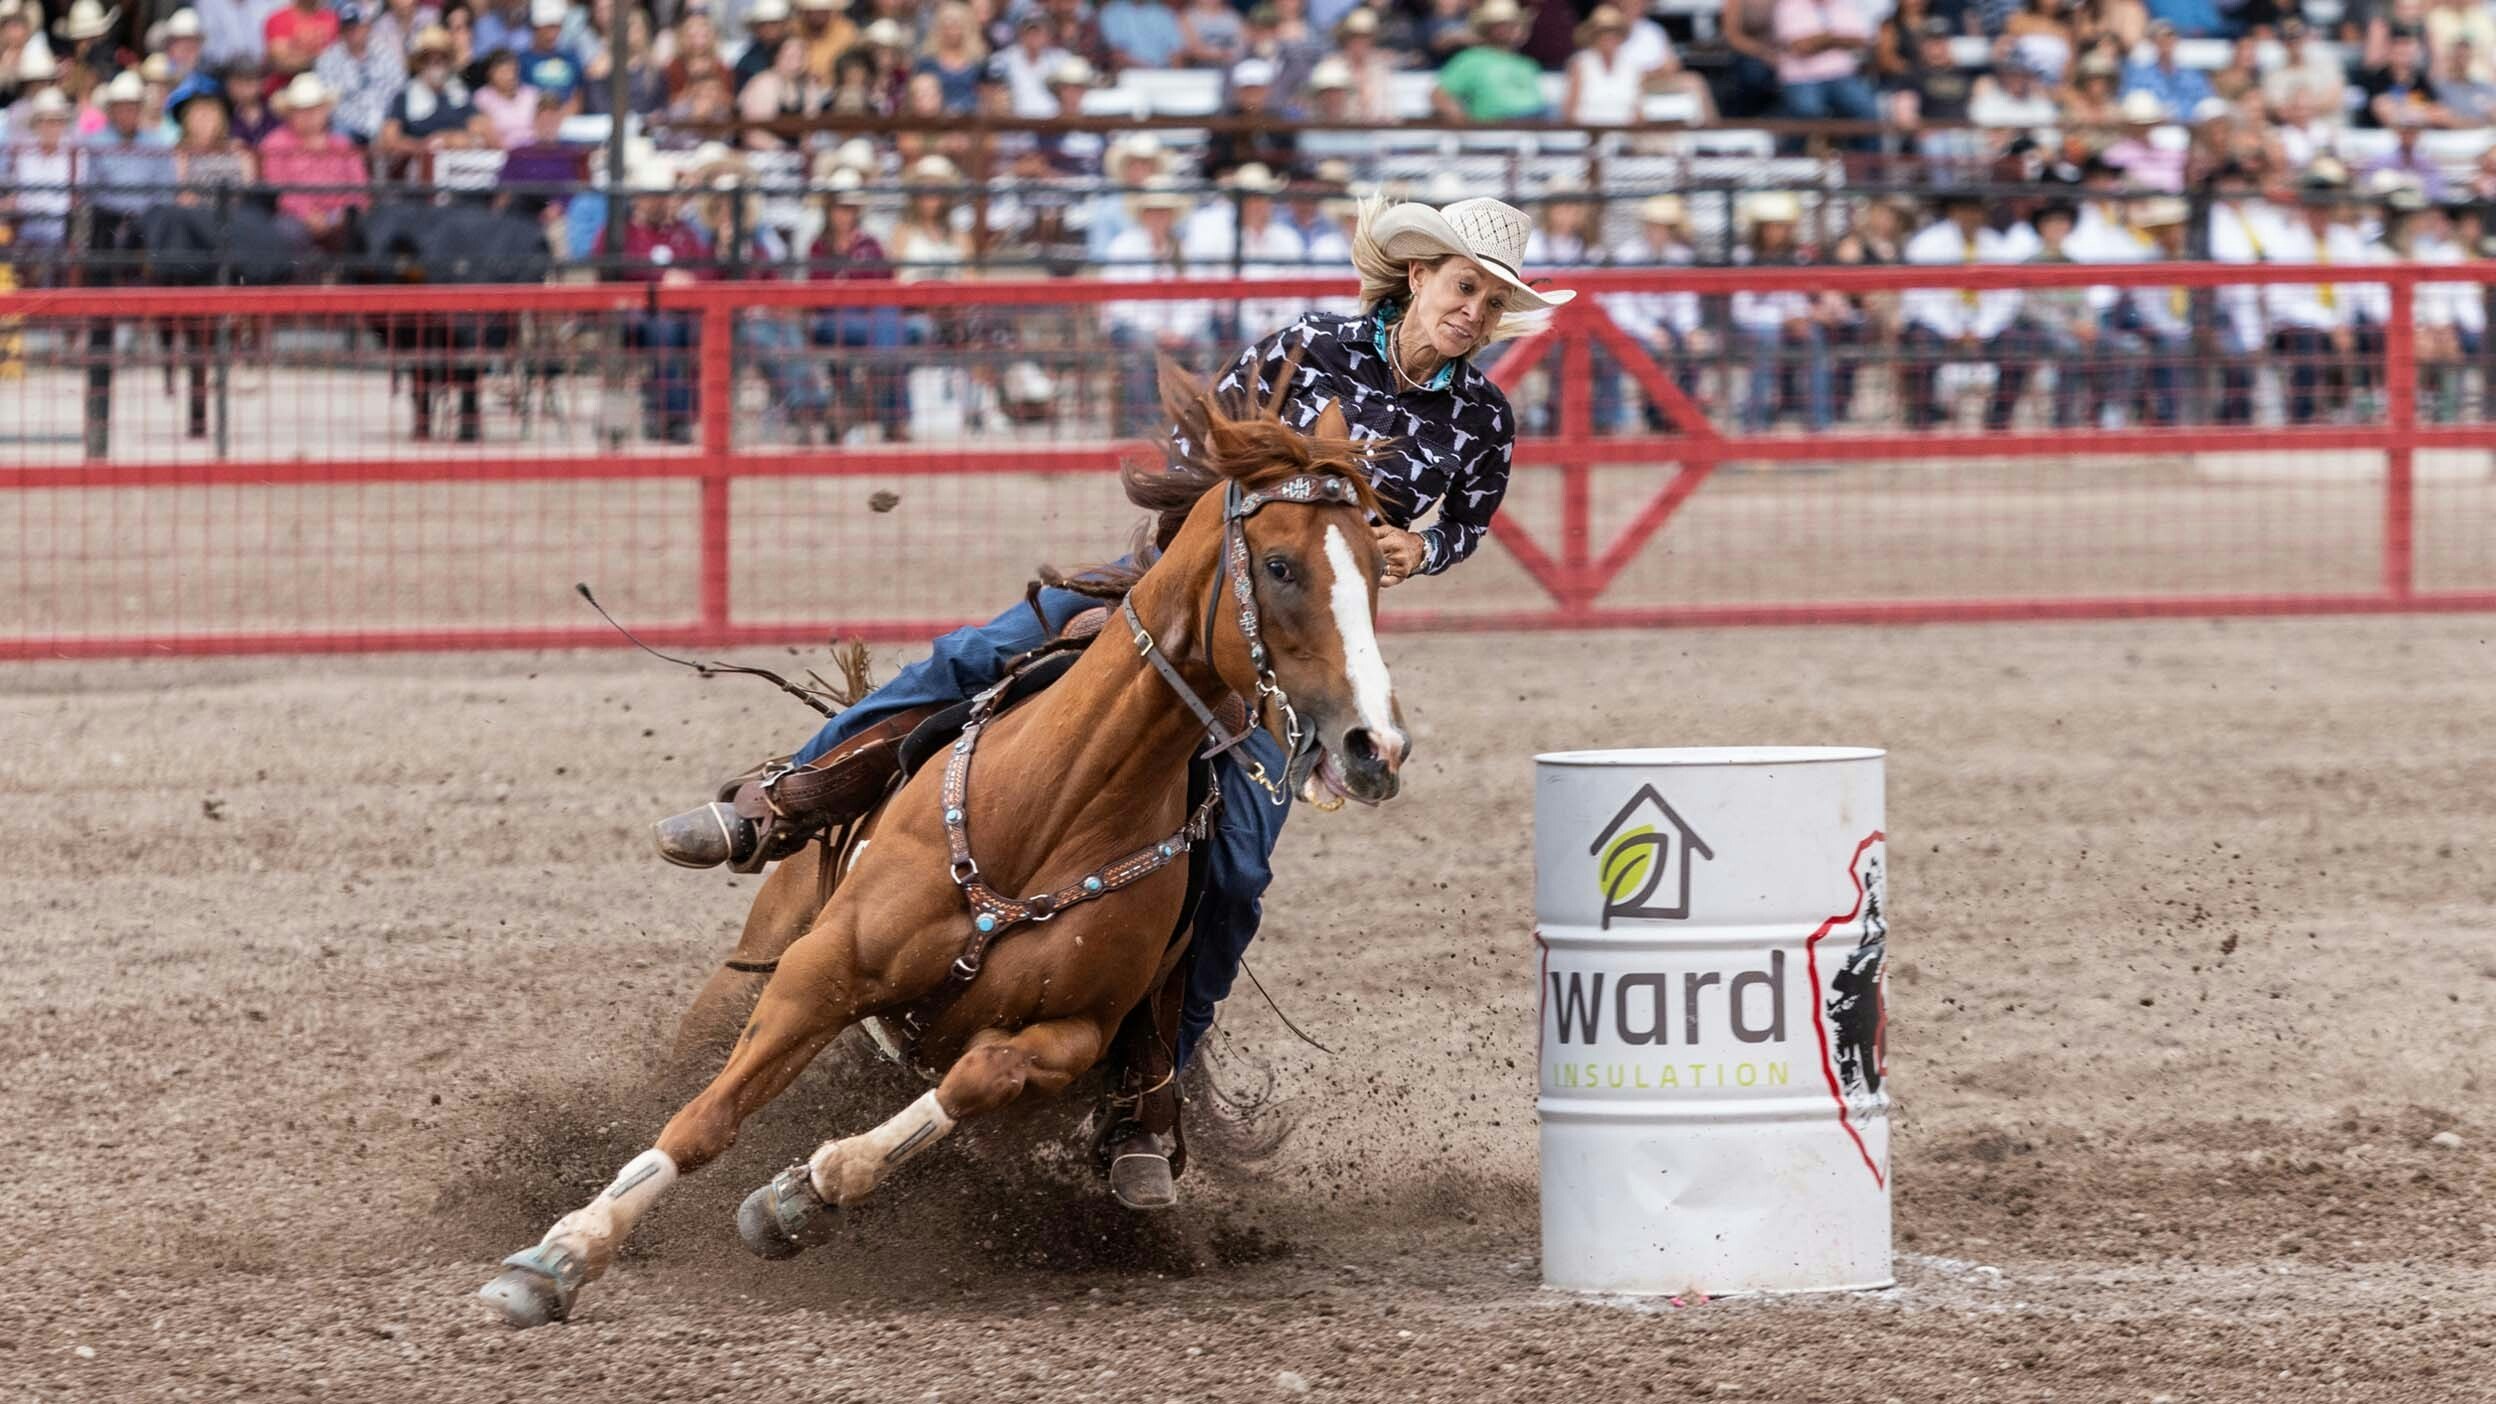 Sue Smith from Blackfoot, ID sets the fastest time record at Cheyenne Frontier Days with a 16.89 second run to win the CFD Barrel Racing Championship.